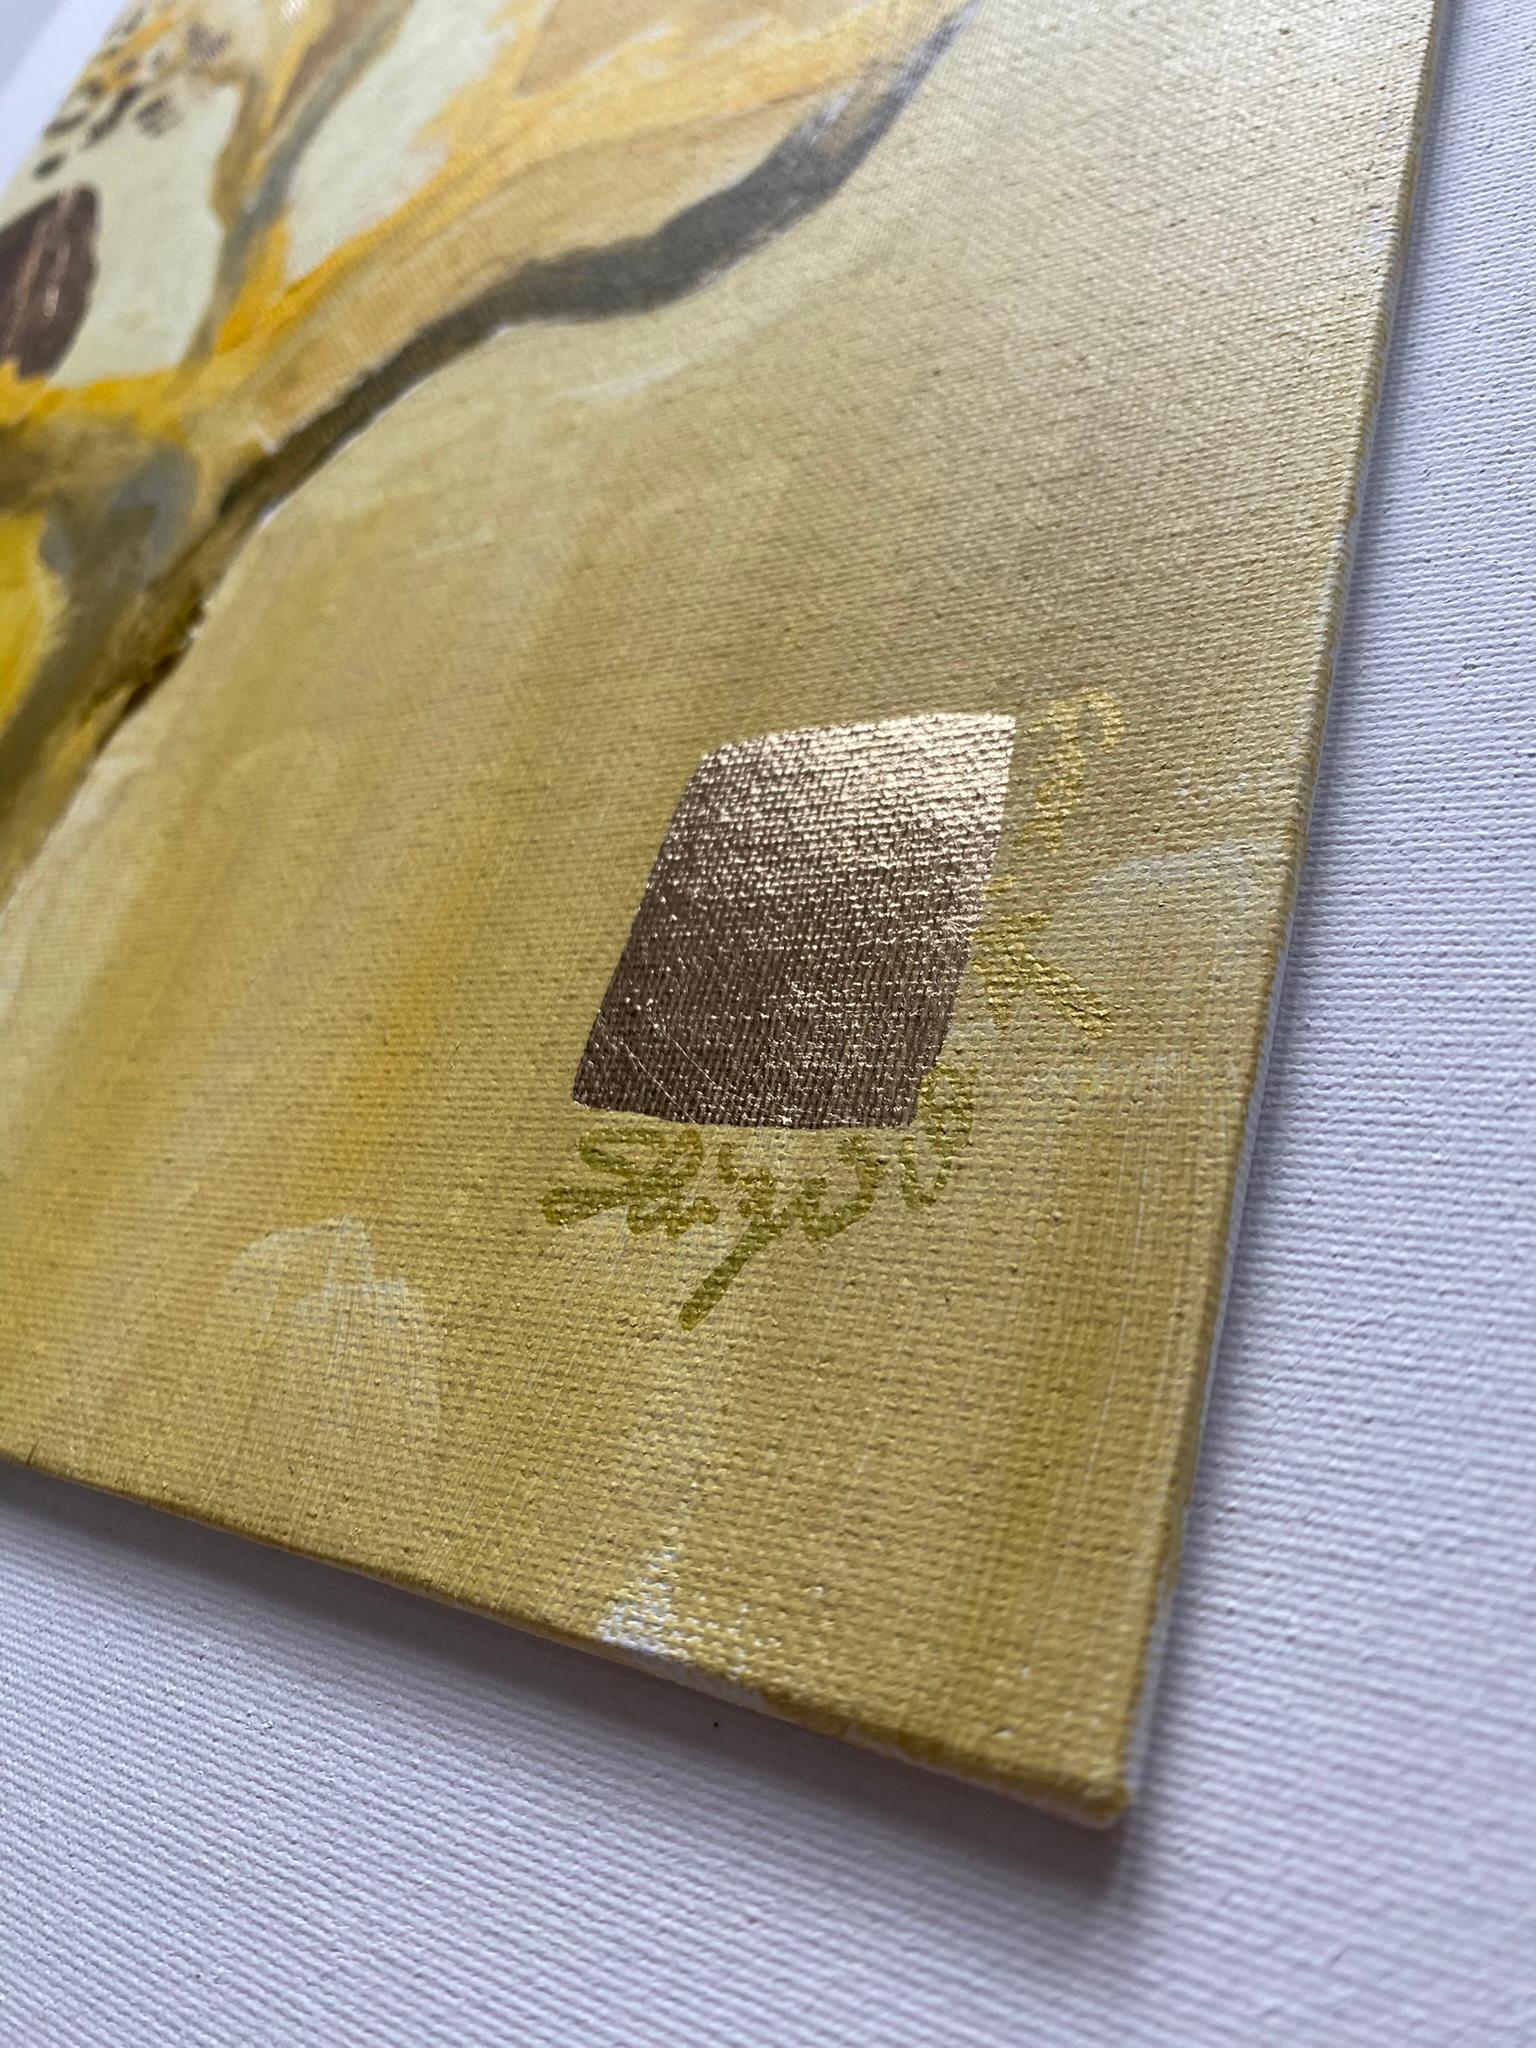 Original-Primary Yellow-Sunlit-Abstract-Expression-Gold Leaf-UK Awarded Artist 7